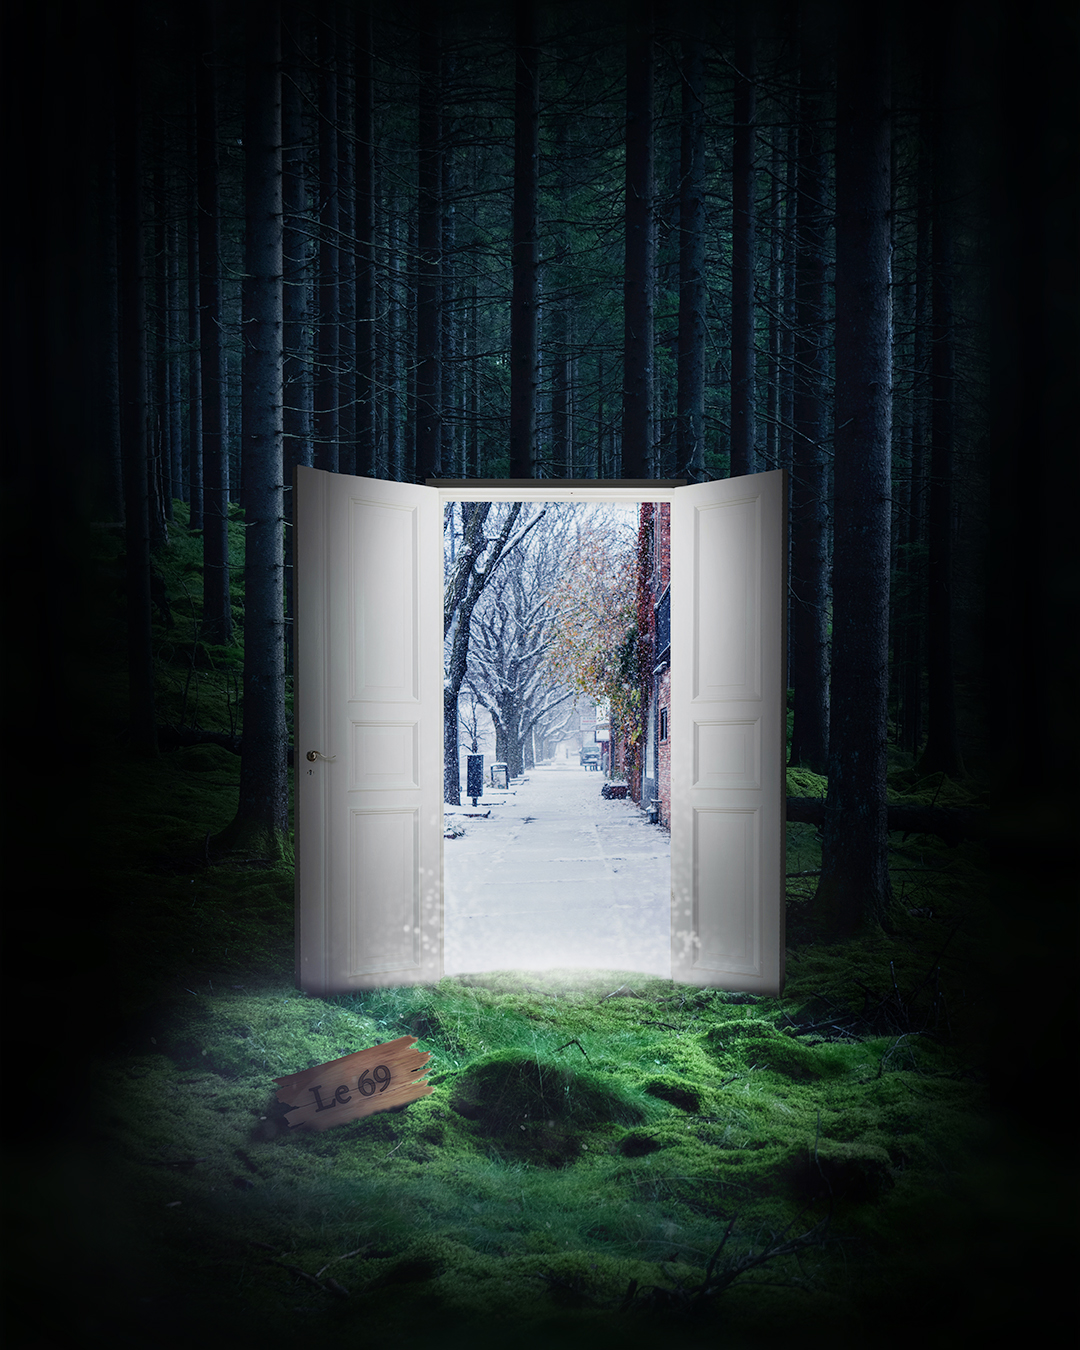 General 1080x1350 forest nature door street art photoshopped snow grass moss on the doorstep night photo manipulation tree trunk trees pine trees house winter